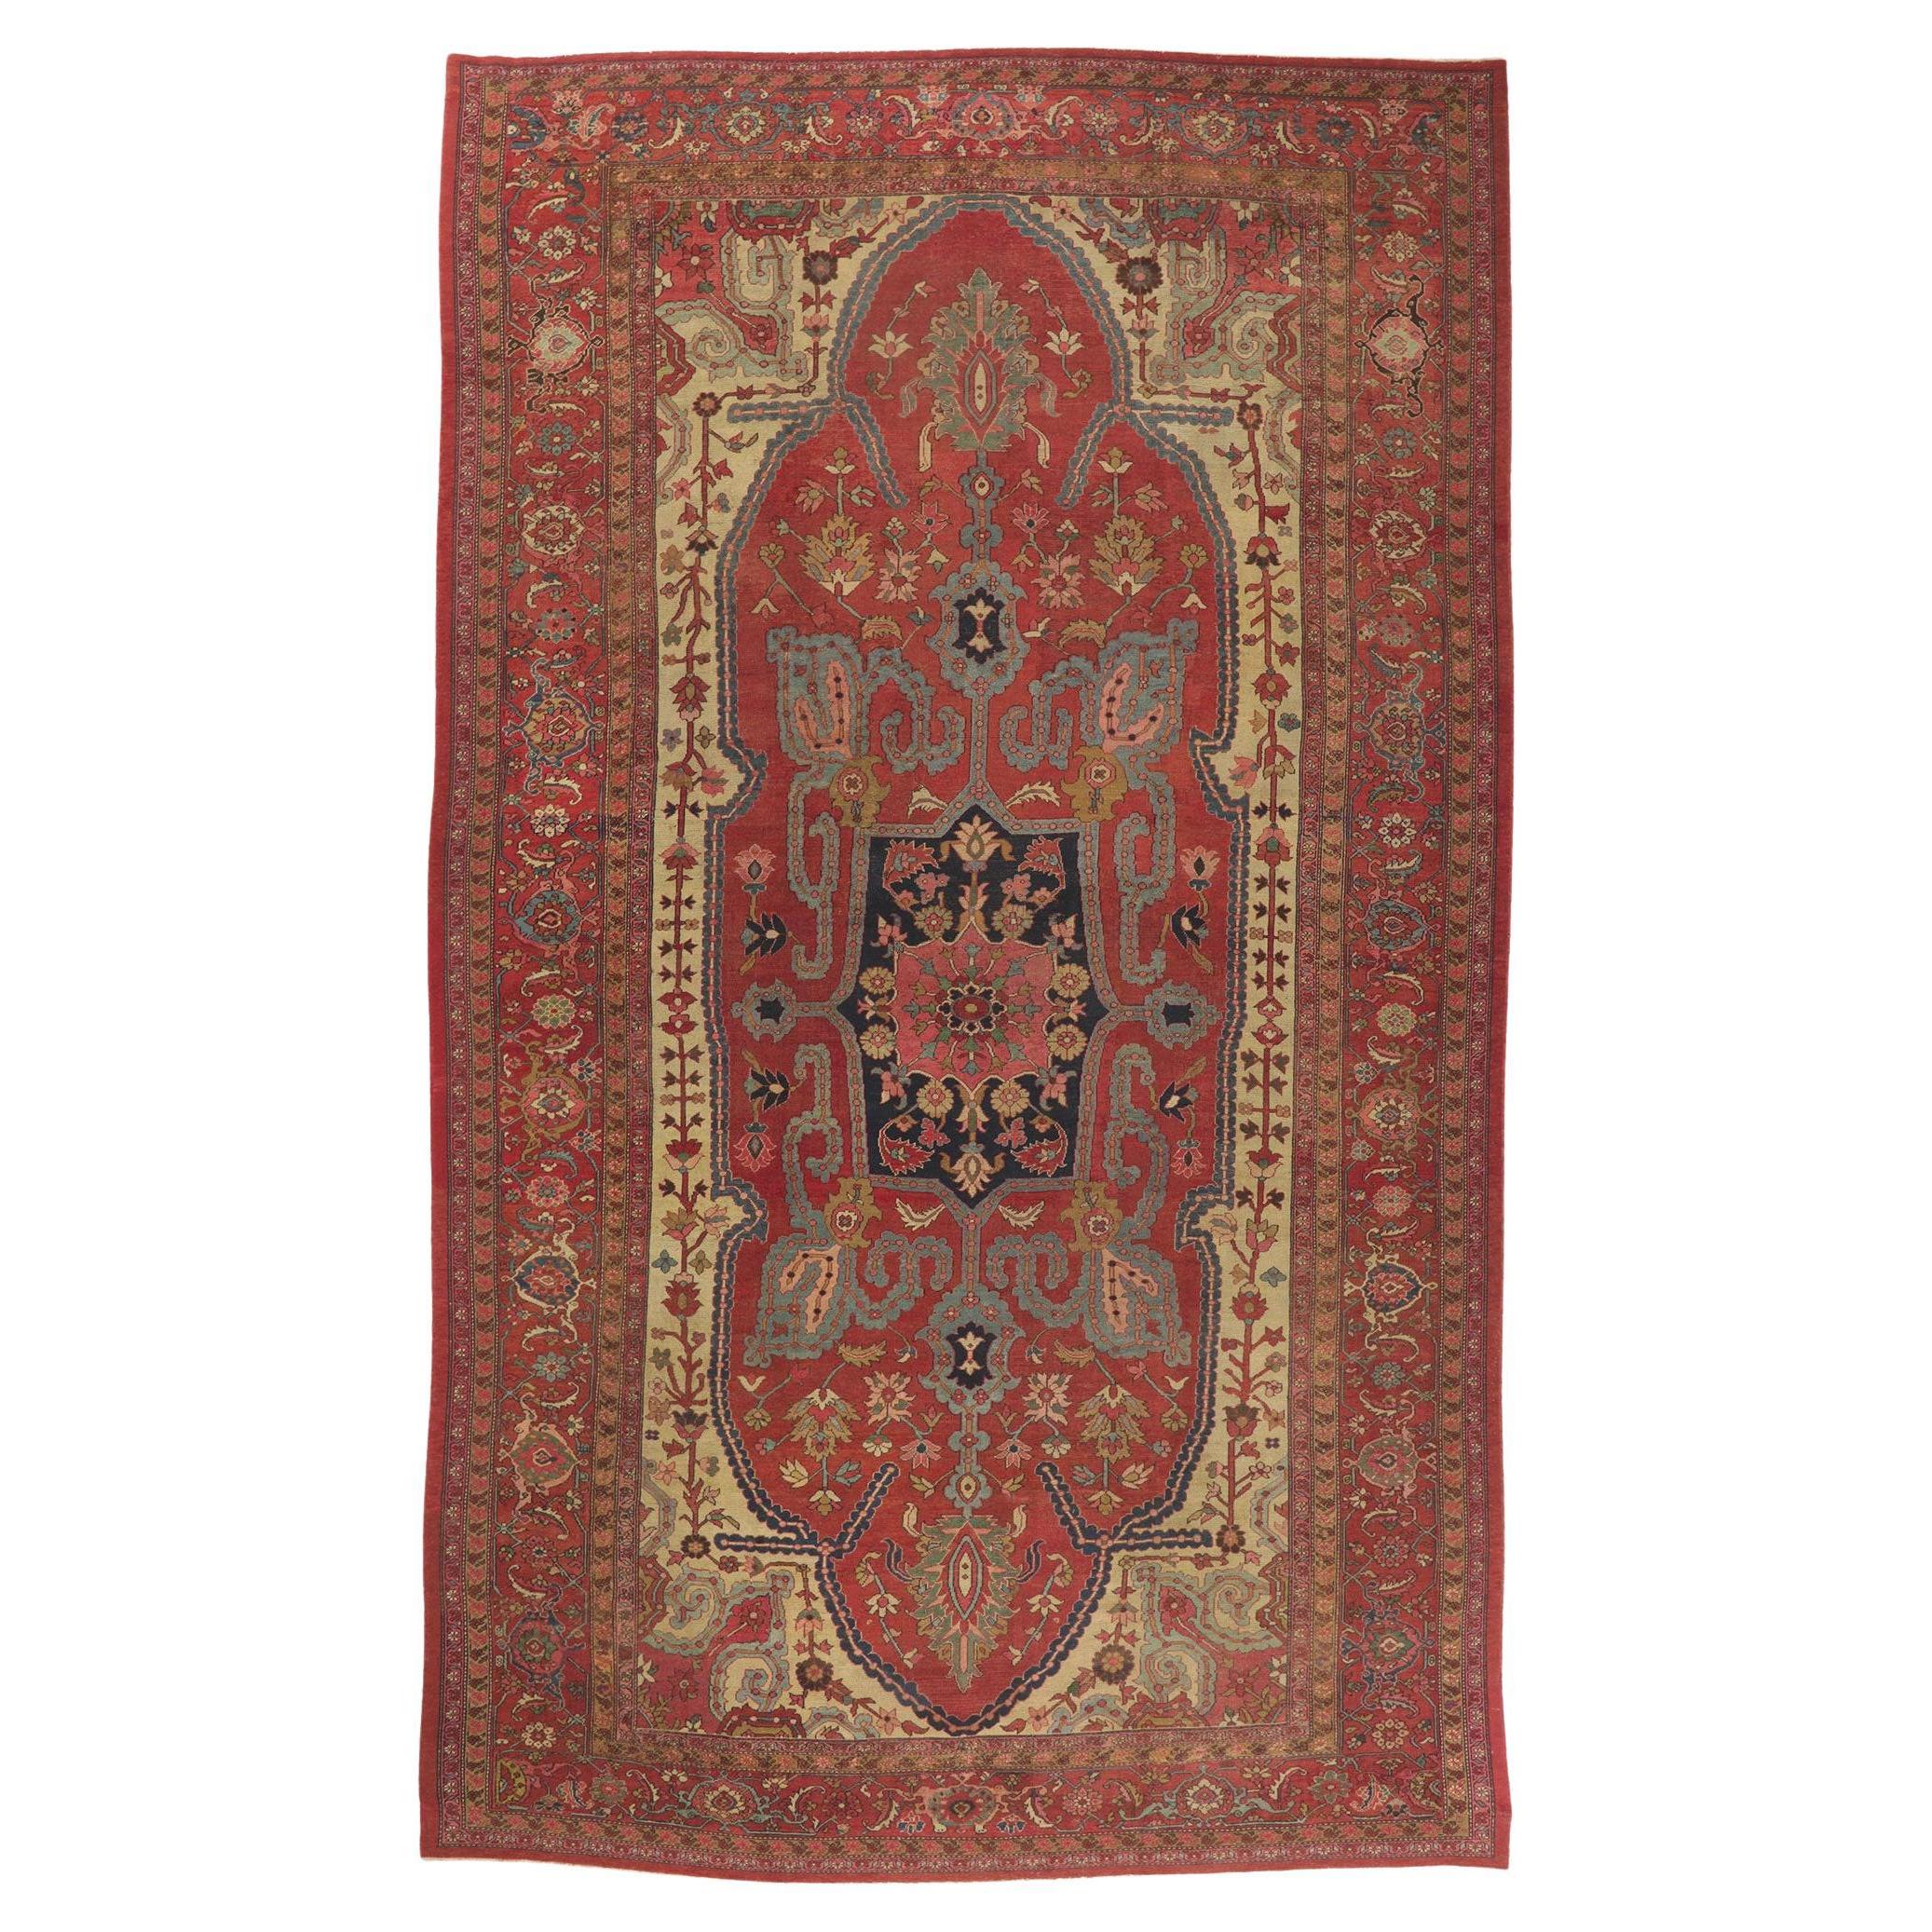 Oversized Antique Persian Bakshaish Rug, Timeless Appeal Meets Perpetually Posh For Sale